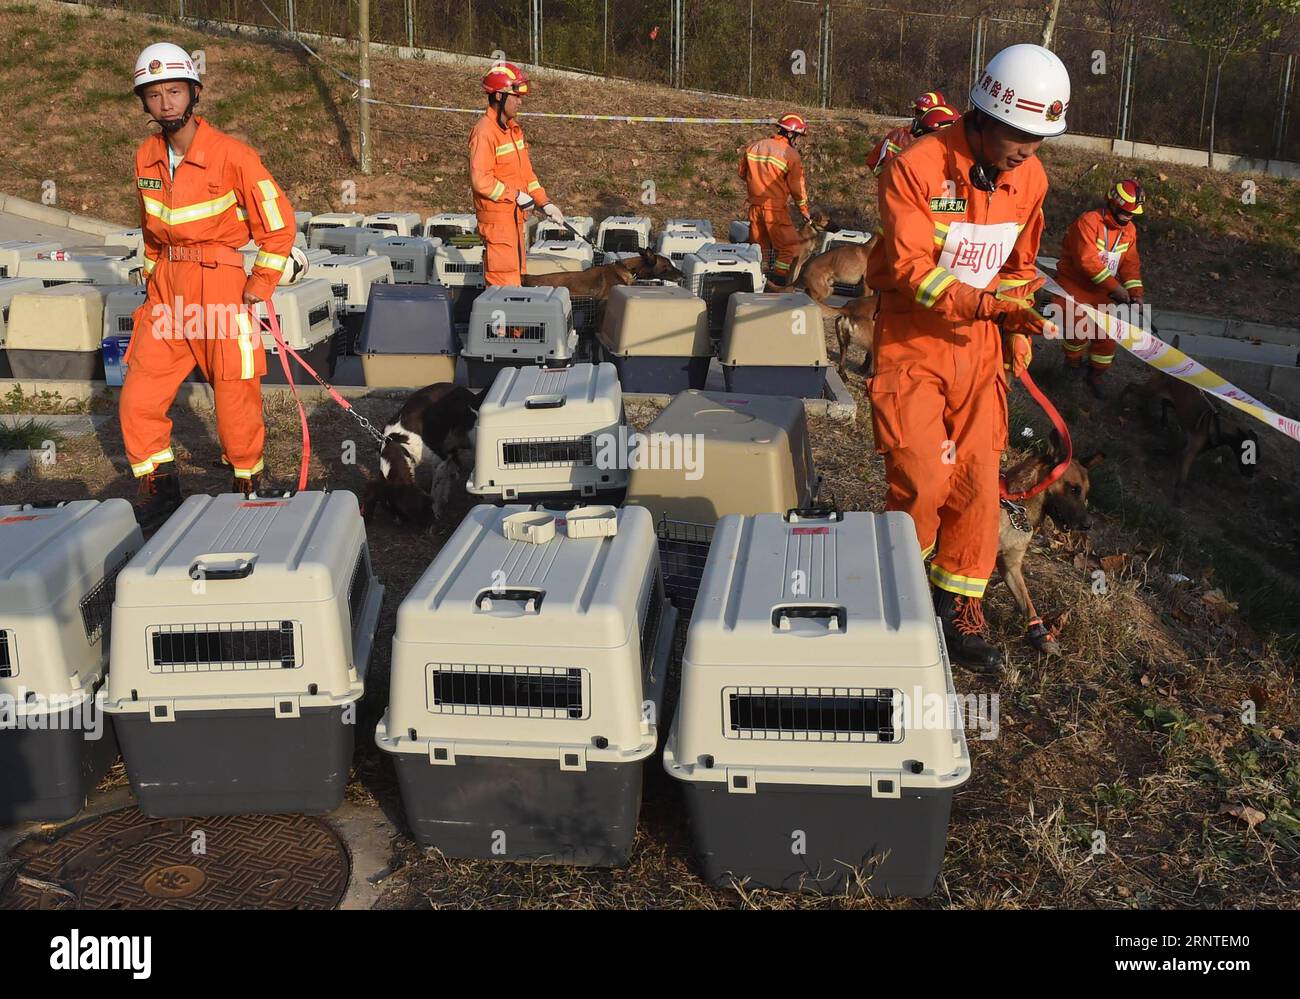 (171108) -- JINAN, Nov. 8, 2017 -- Drillers take sniffer dogs to prepare for a national competition of earthquake rescue in Jinan, capital of east China s Shandong Province, Nov. 7, 2017. ) (wf) CHINA-JINAN-DRILL-SNIFFER DOG (CN) LixZiheng PUBLICATIONxNOTxINxCHN Stock Photo